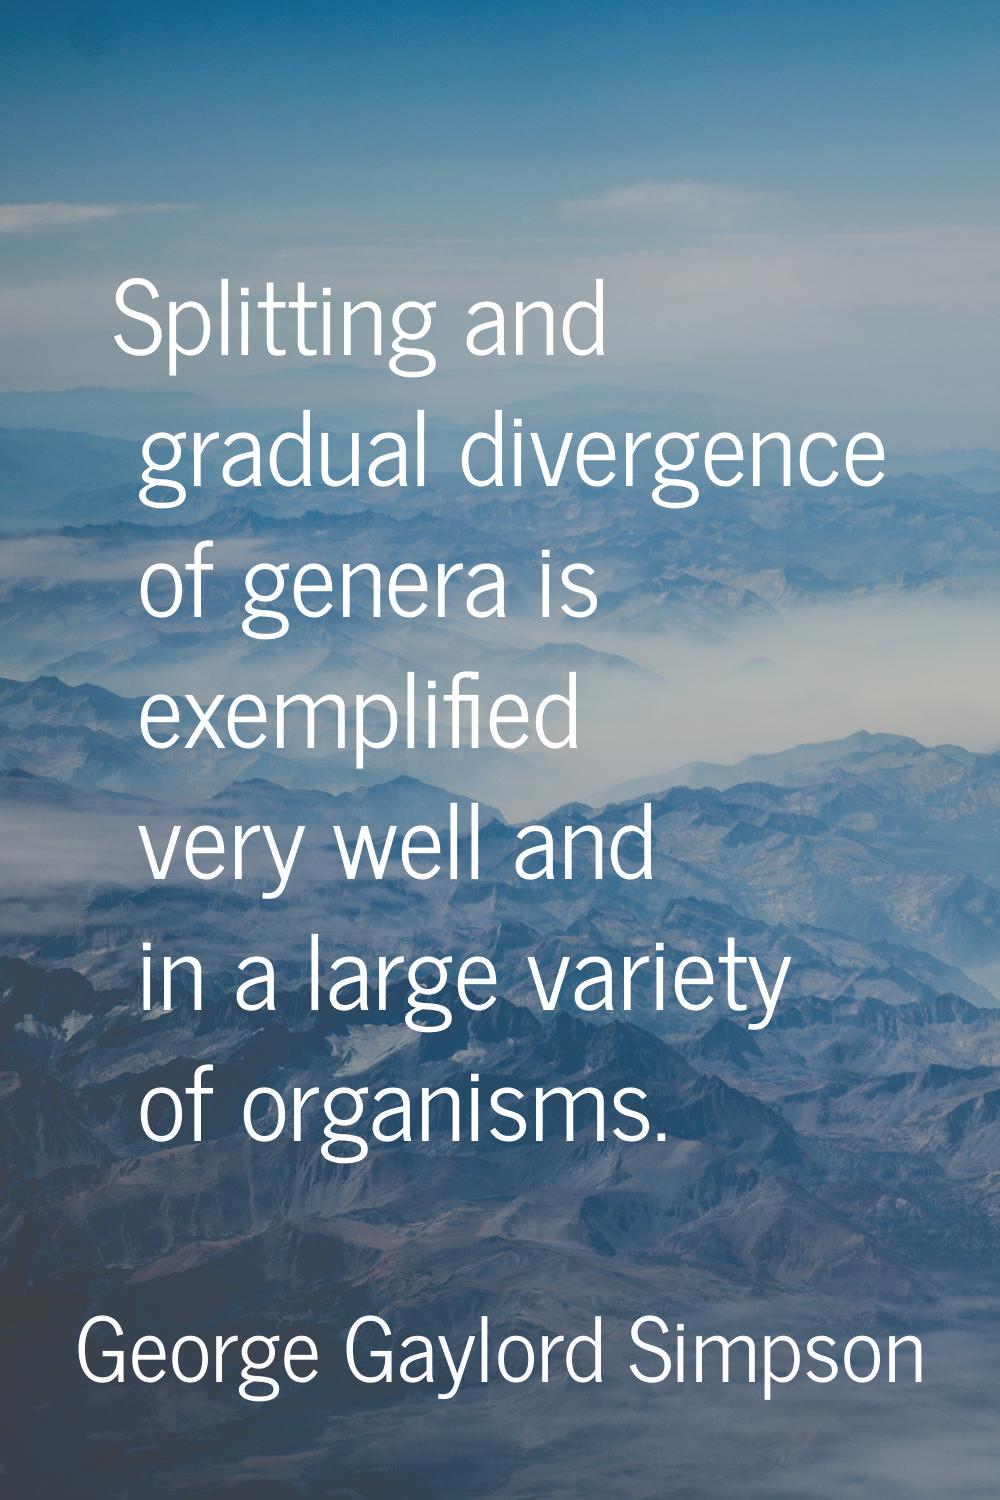 Splitting and gradual divergence of genera is exemplified very well and in a large variety of organ